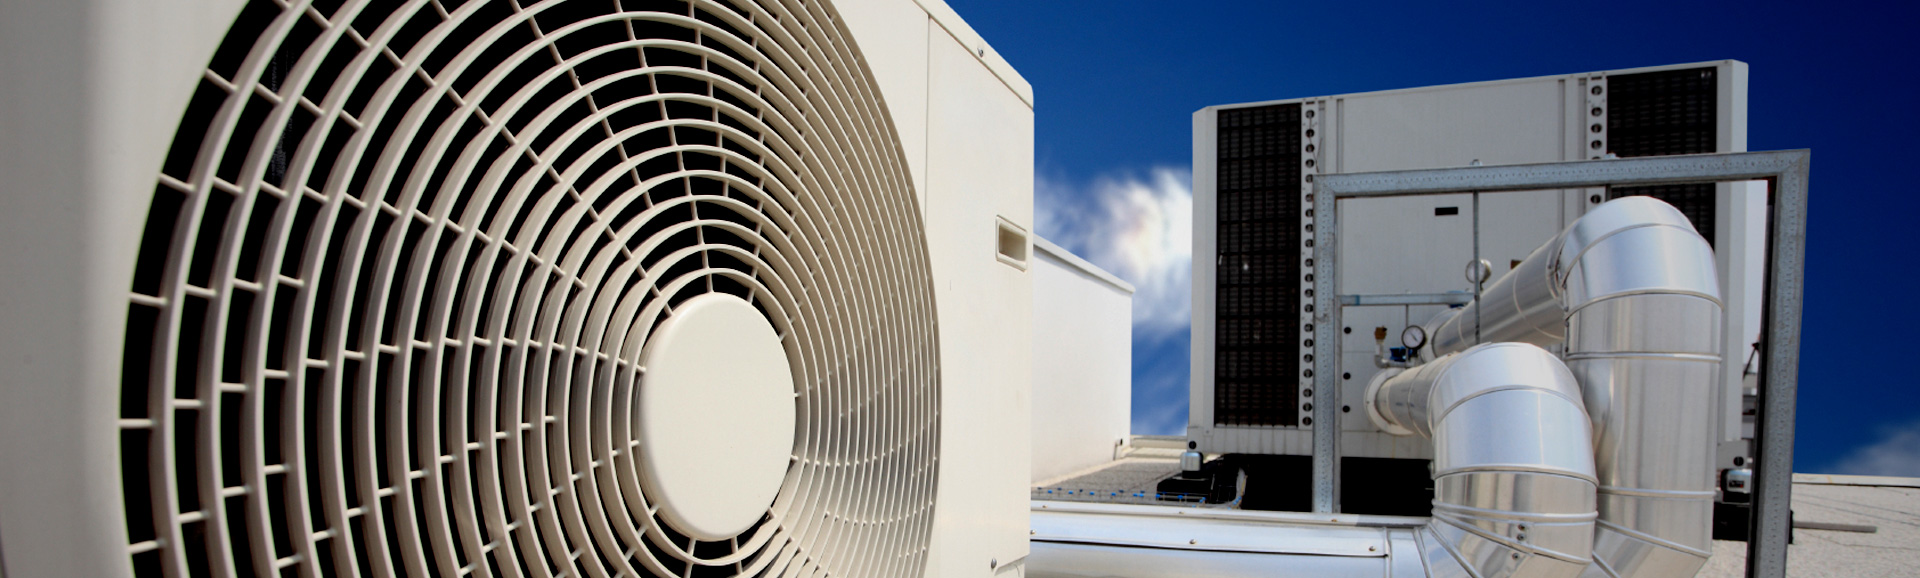 How To Maintain An Air Conditioner In 8 Simple Steps